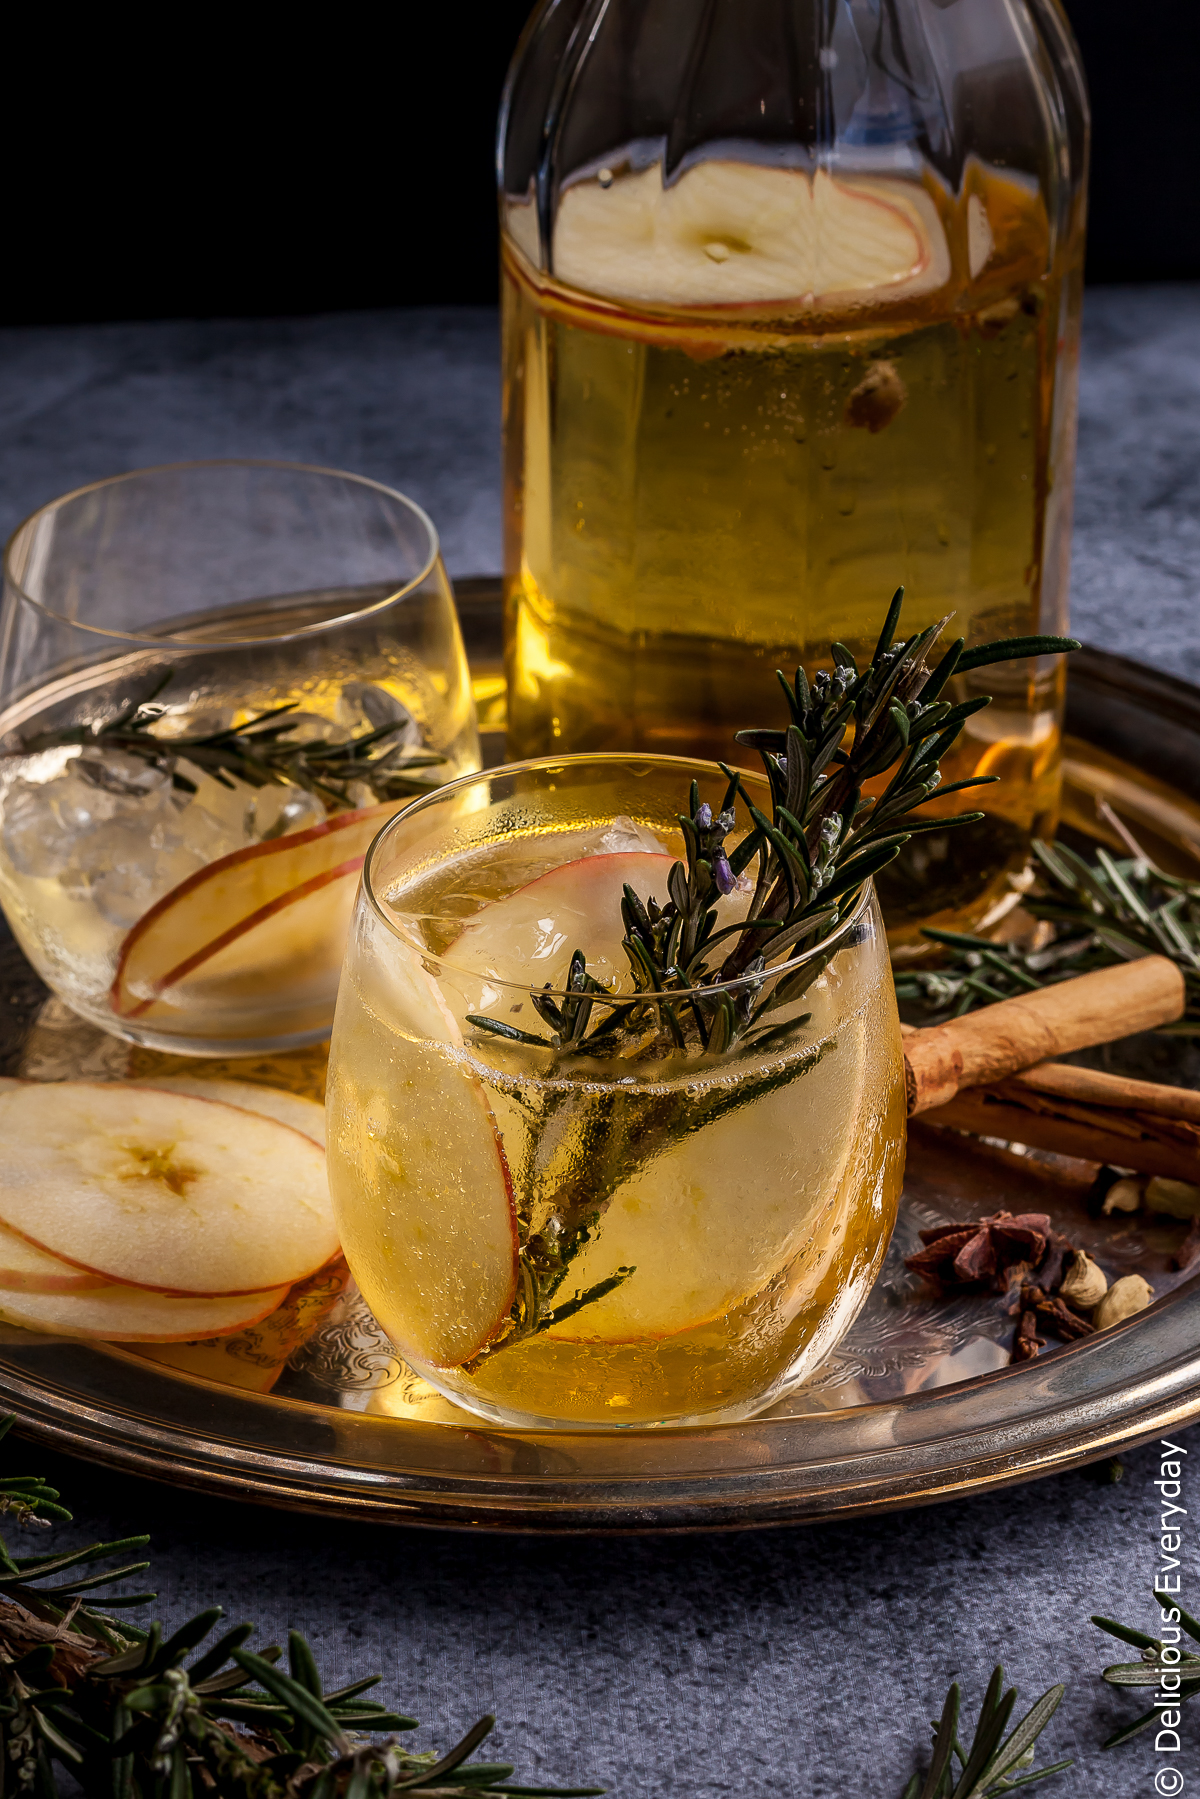 Beat the winter blues with this gorgeous fragrant homemade sugar-free Mulled Apple Cider recipe which tastes just like apple pie!